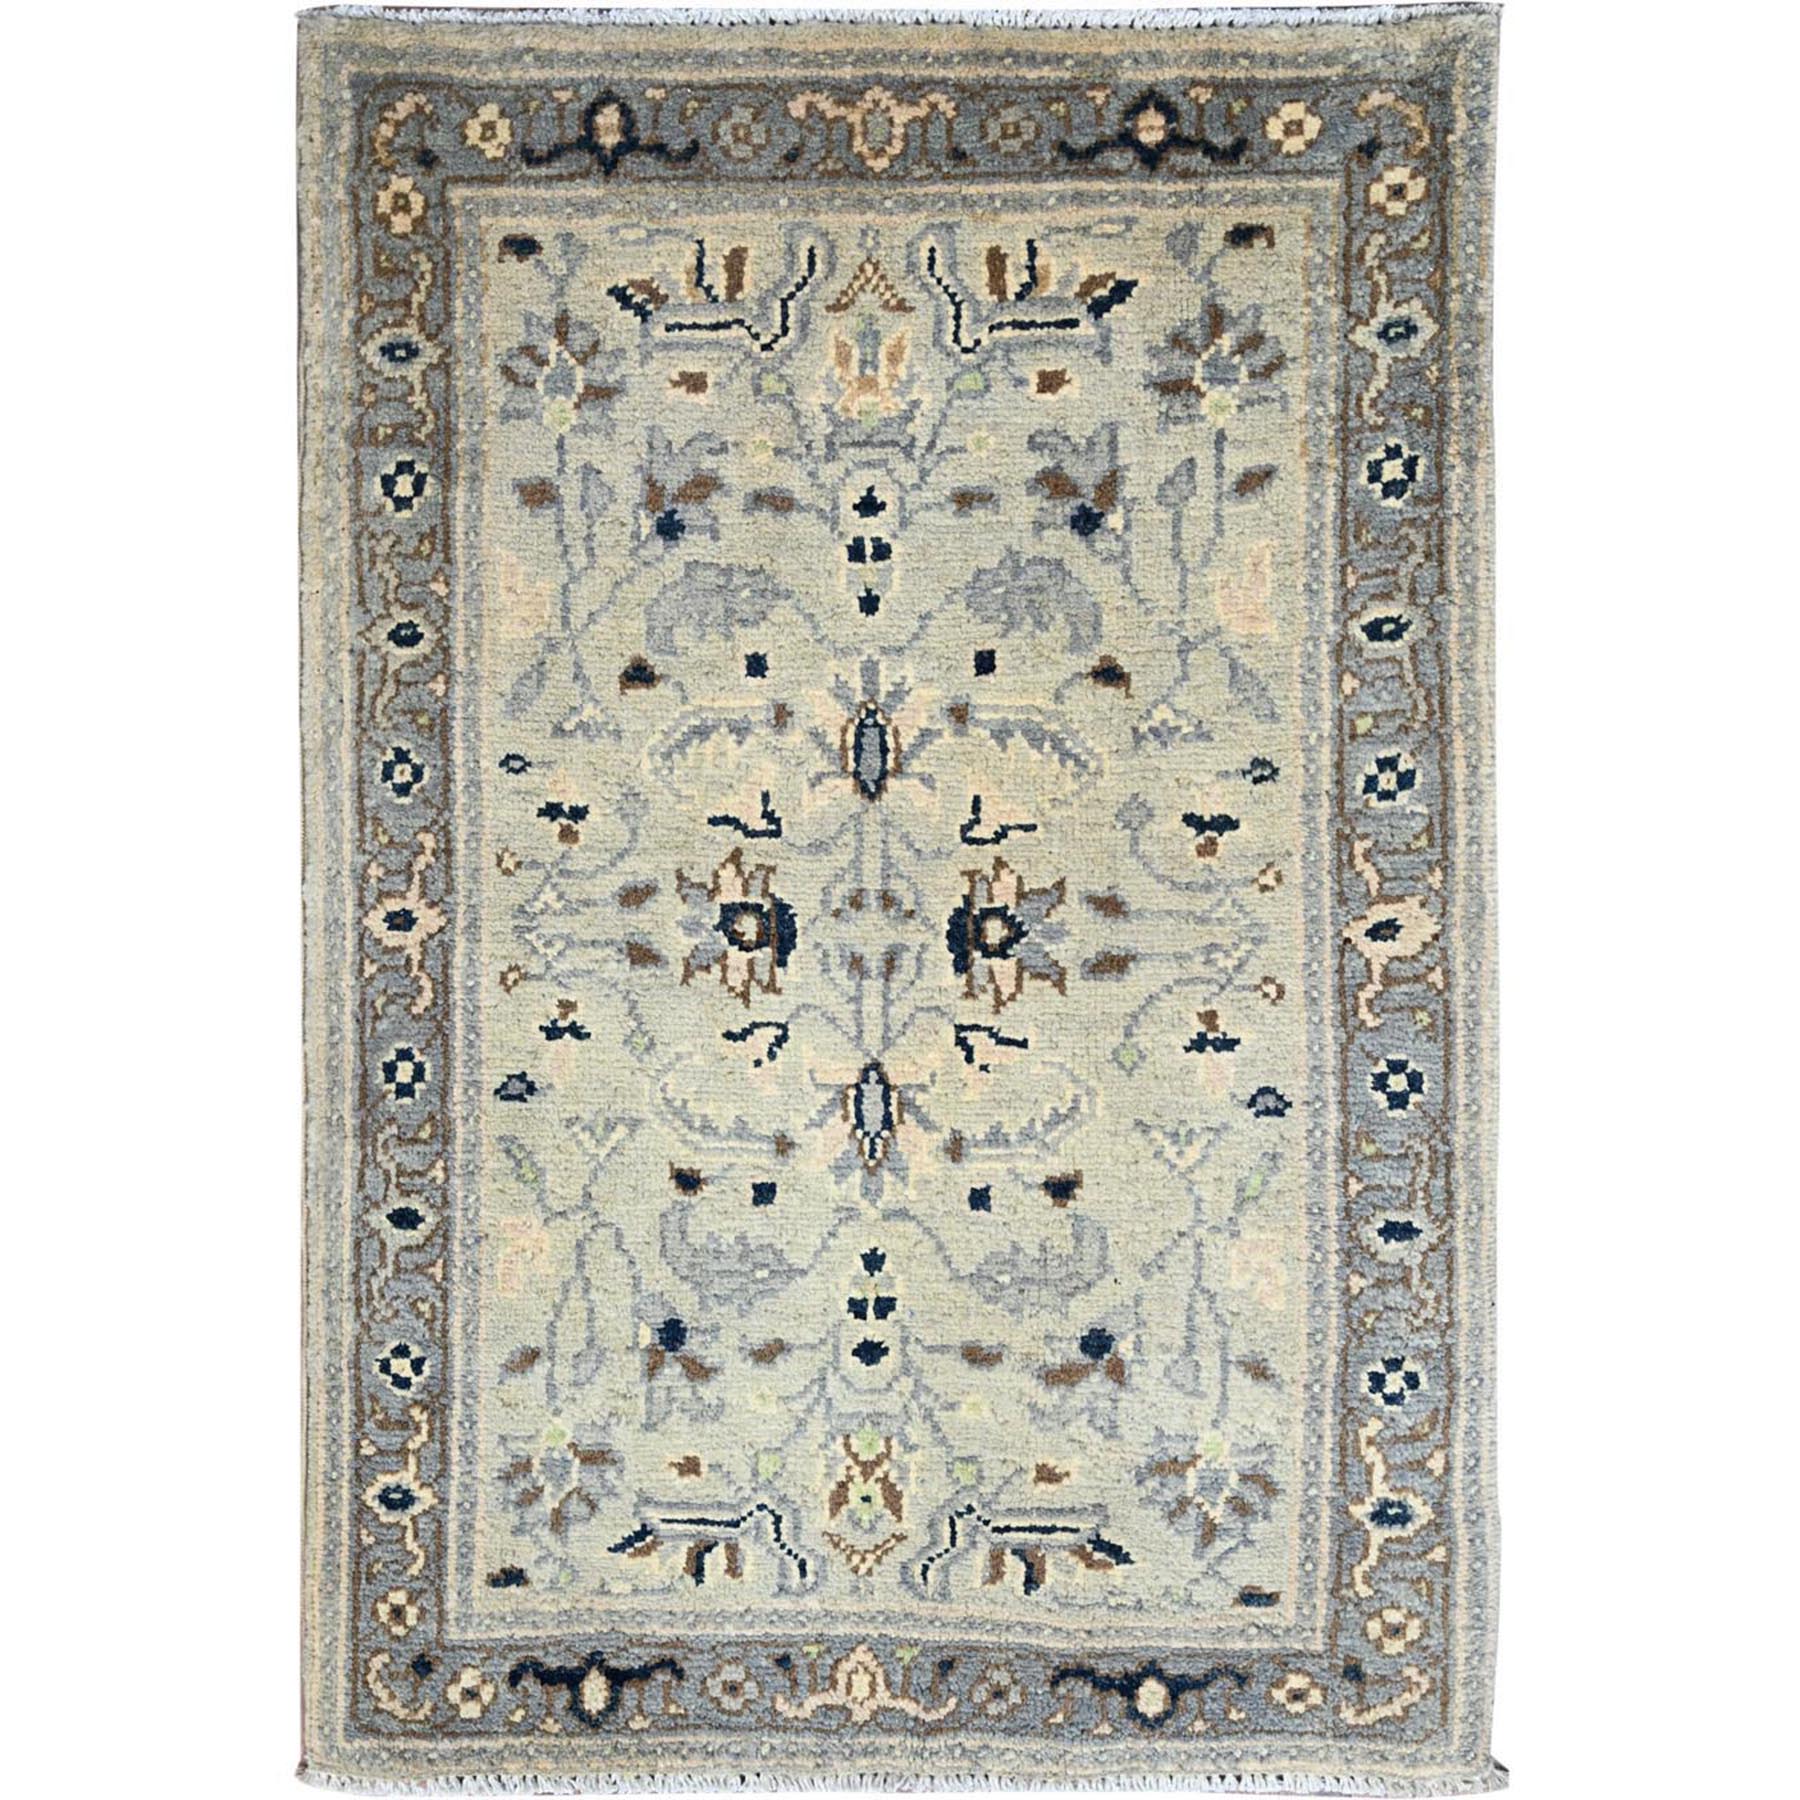  Wool Hand-Knotted Area Rug 2'1